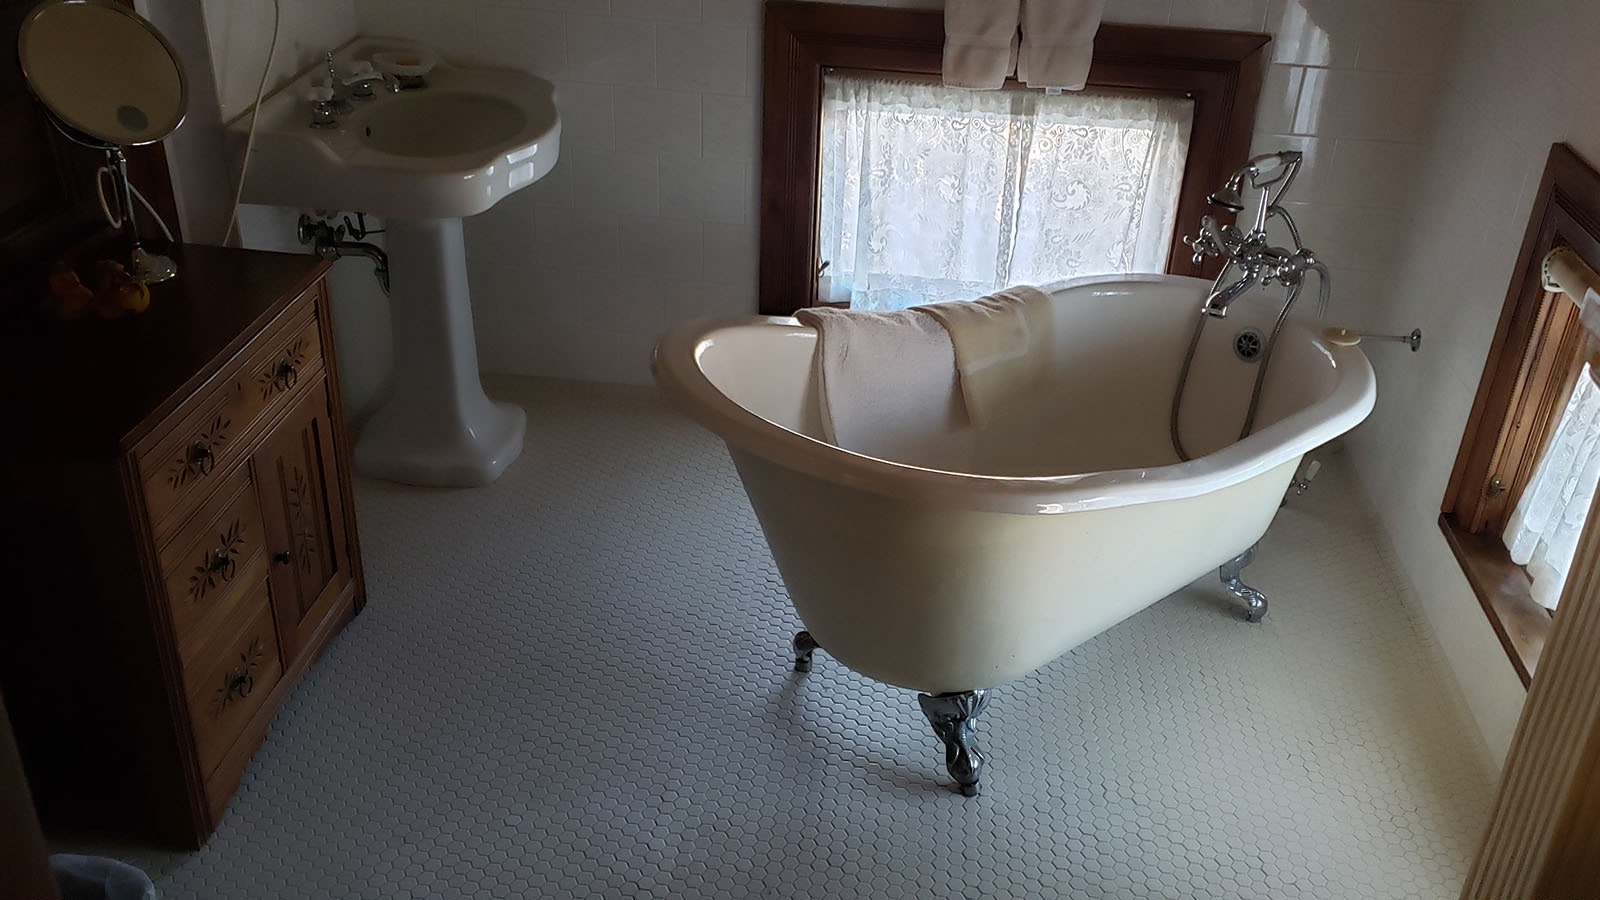 The clawfoot tubs and porcelain sinks are original to the mansion.